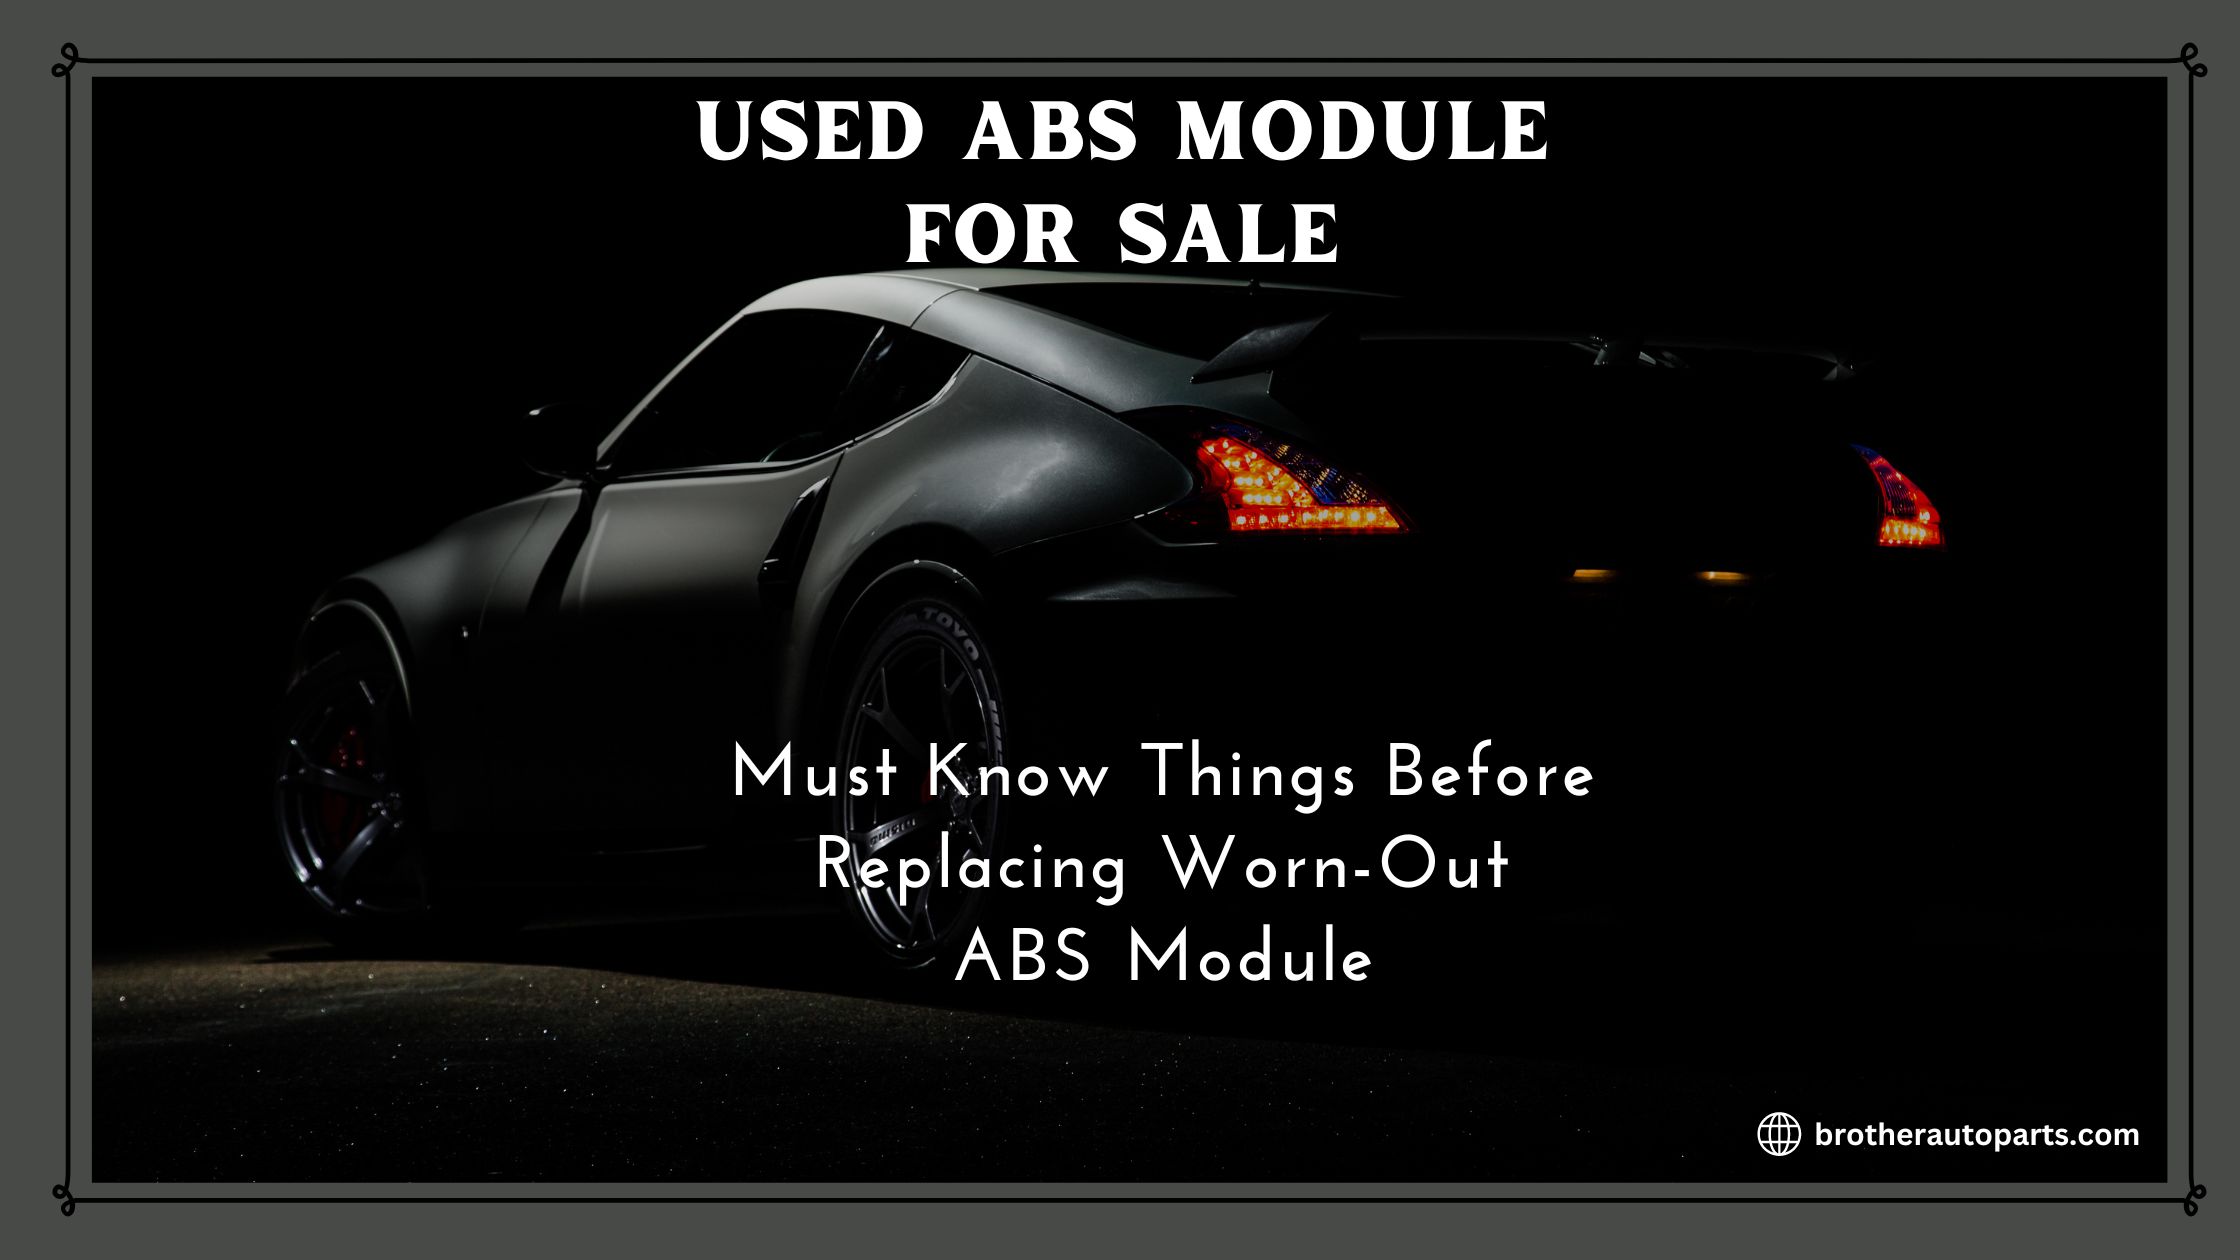 Reprogramming Used ABS Modules Symptoms of faulty ABS Modules